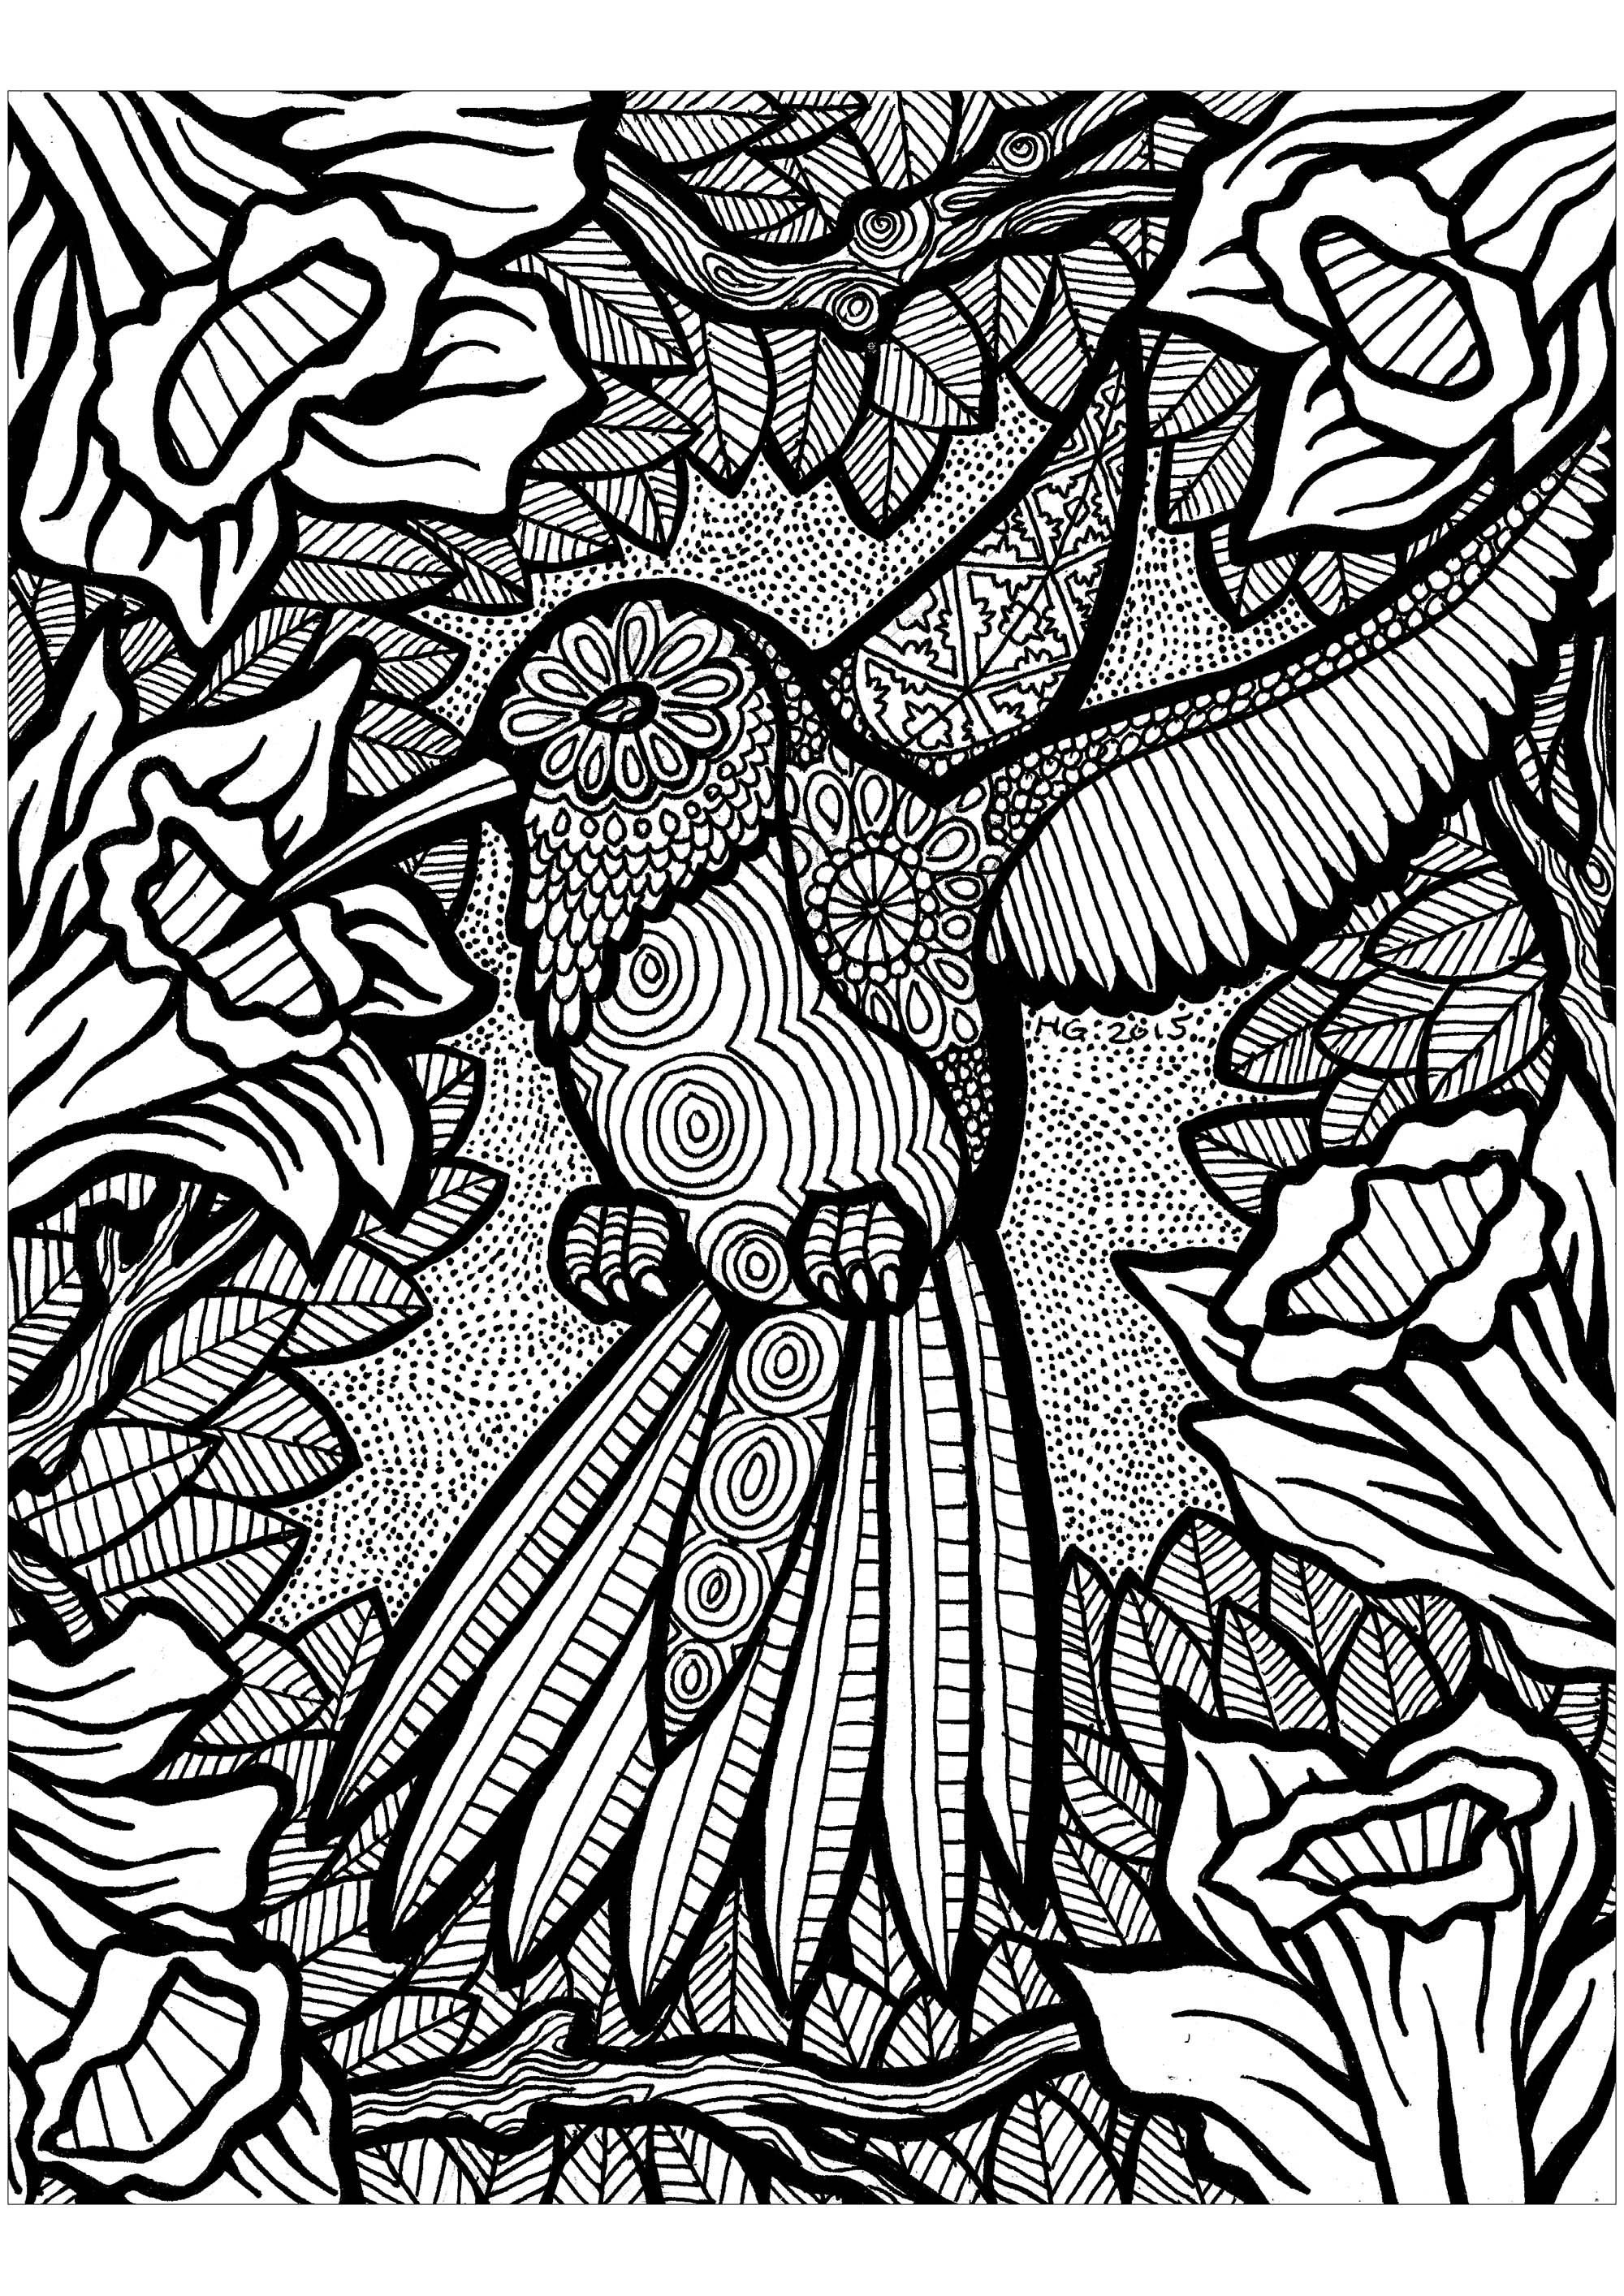 Help this hummingbird fly - all it needs are a few colors!. Coloring with very thick main lines, Artist : HGCreative. Arts